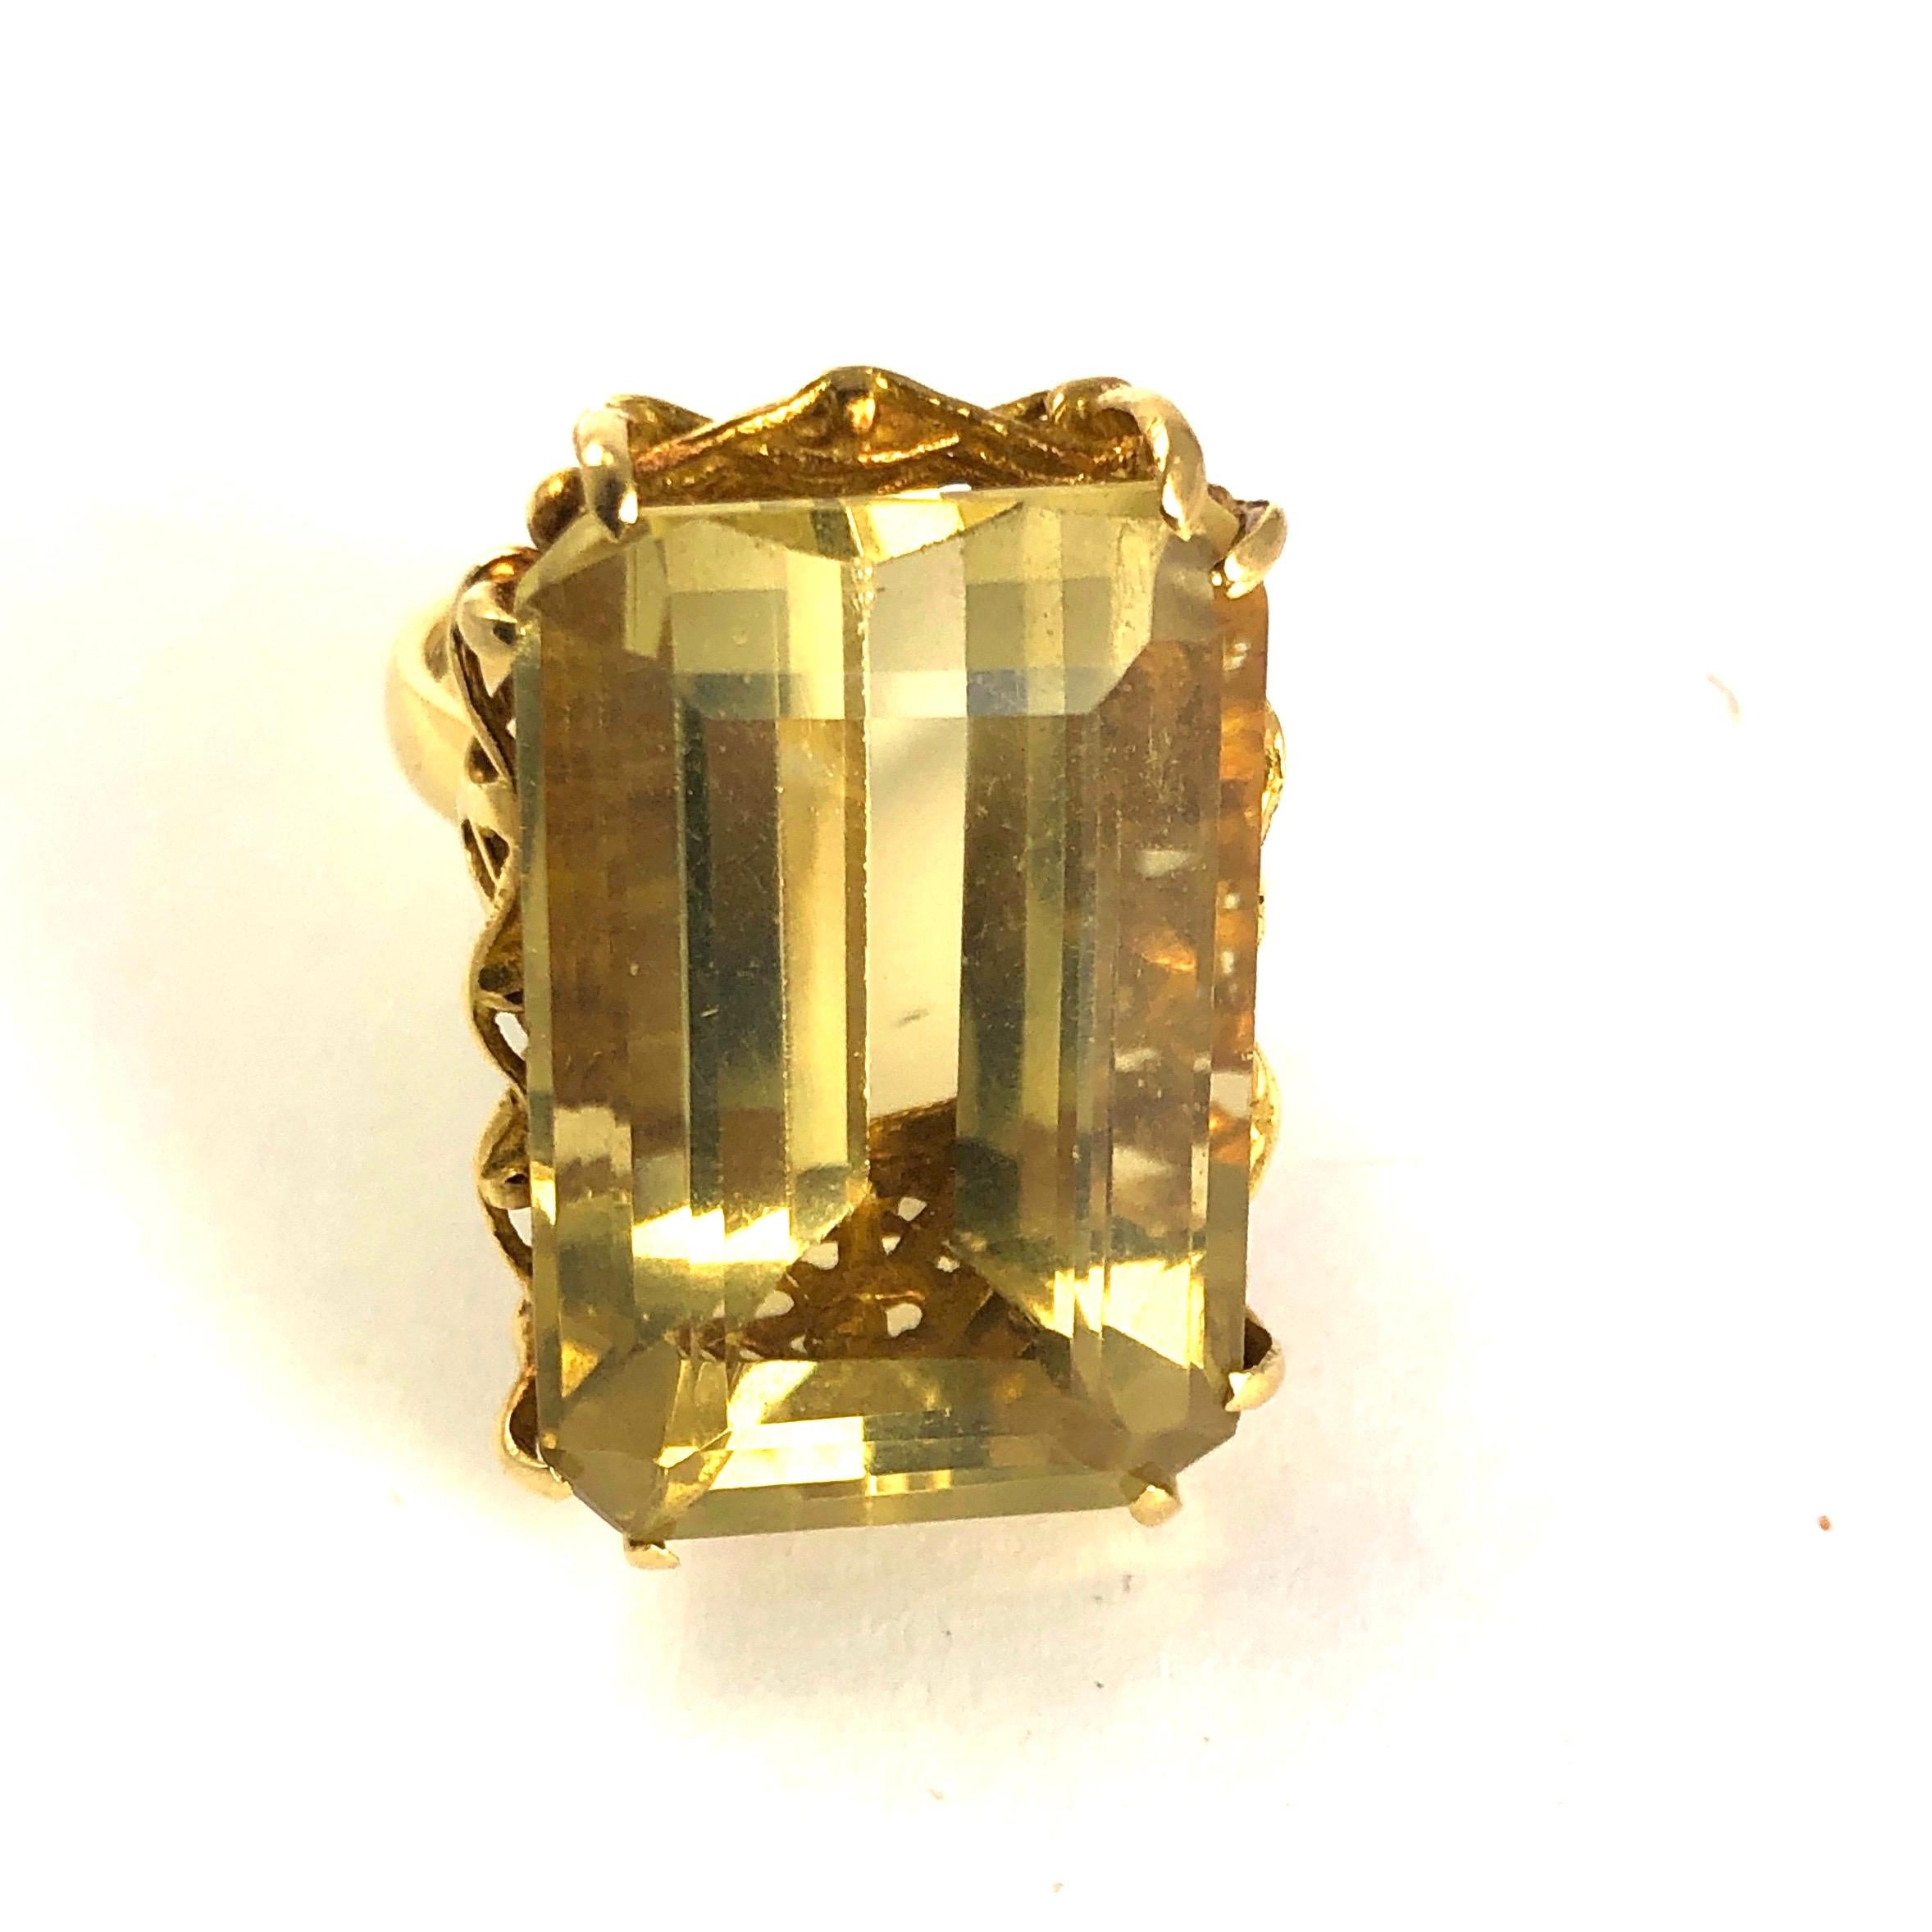 The setting this ring is made up of stunning basket weave detail which cradles the gorgeous yellow citrine stone. The detail is exquisite and unusual. Measuring 32carats the citrine is large and so eye-catching.

Ring Size: Q or 8

Weight: 15.1g